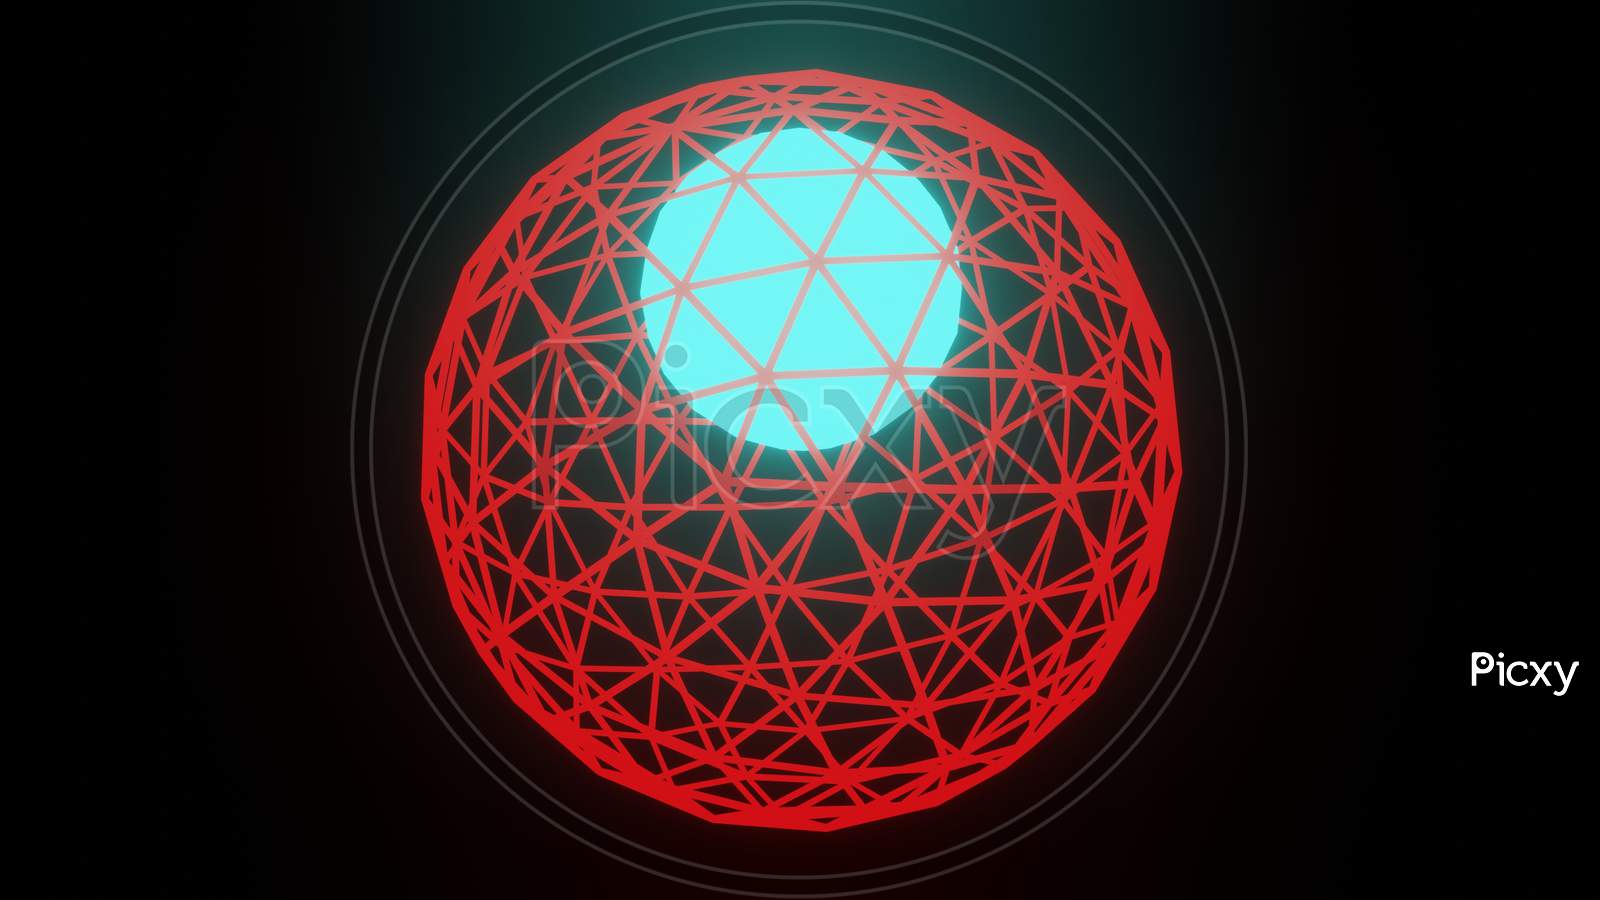 Illustration Graphic Of Red Wireframe Sphere Or Circle With A Glowing Blue Color Energy Ball At Center, Isolated On Black Background Seamless Loop Design. Abstract Polygon Globe With Shadow.